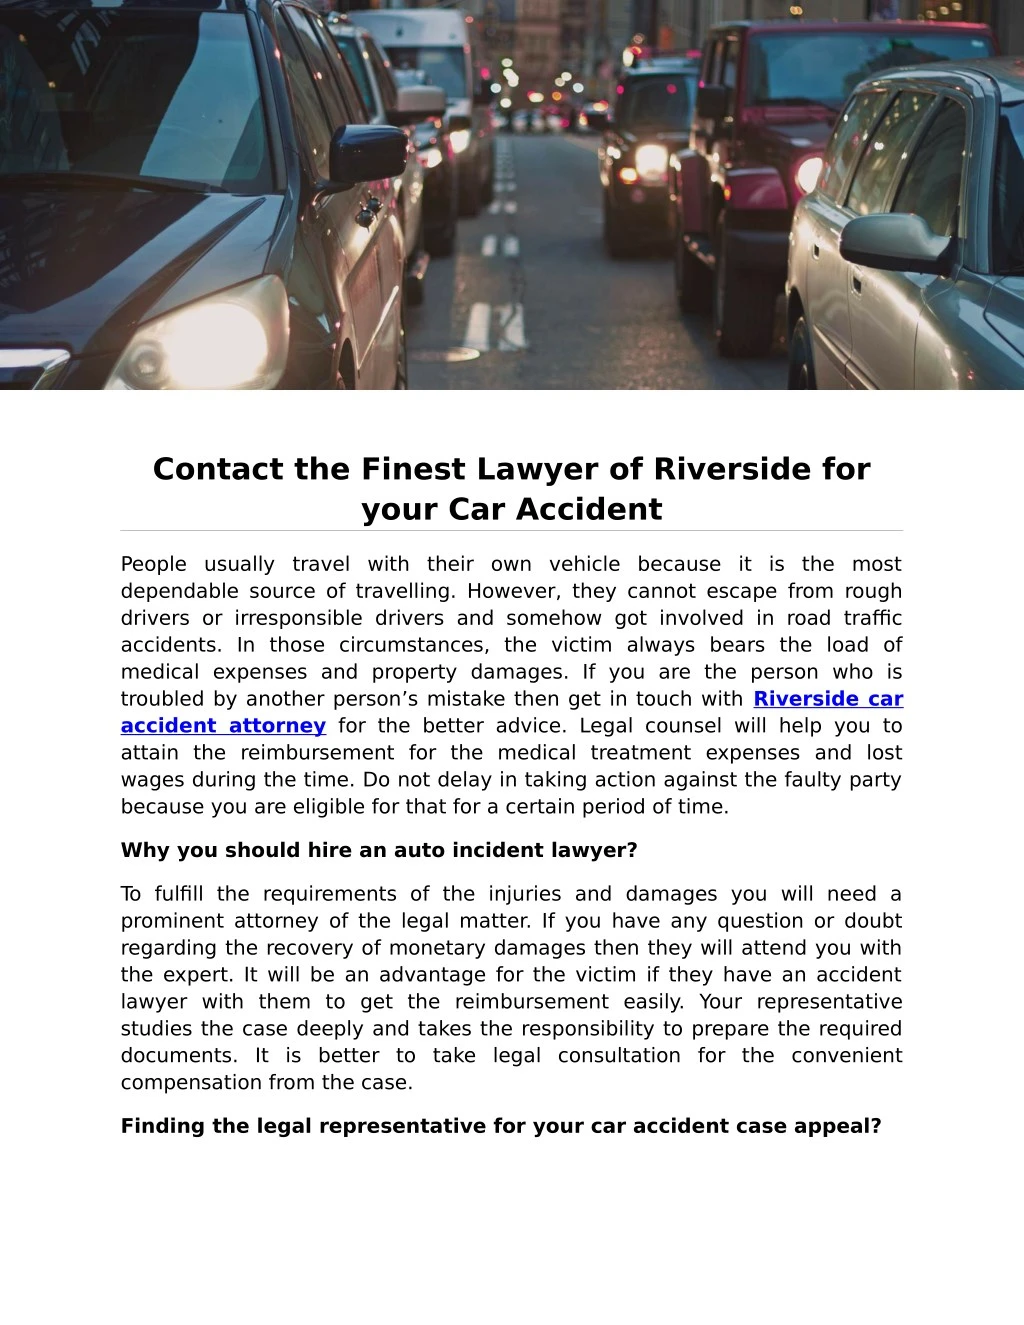 contact the finest lawyer of riverside for your